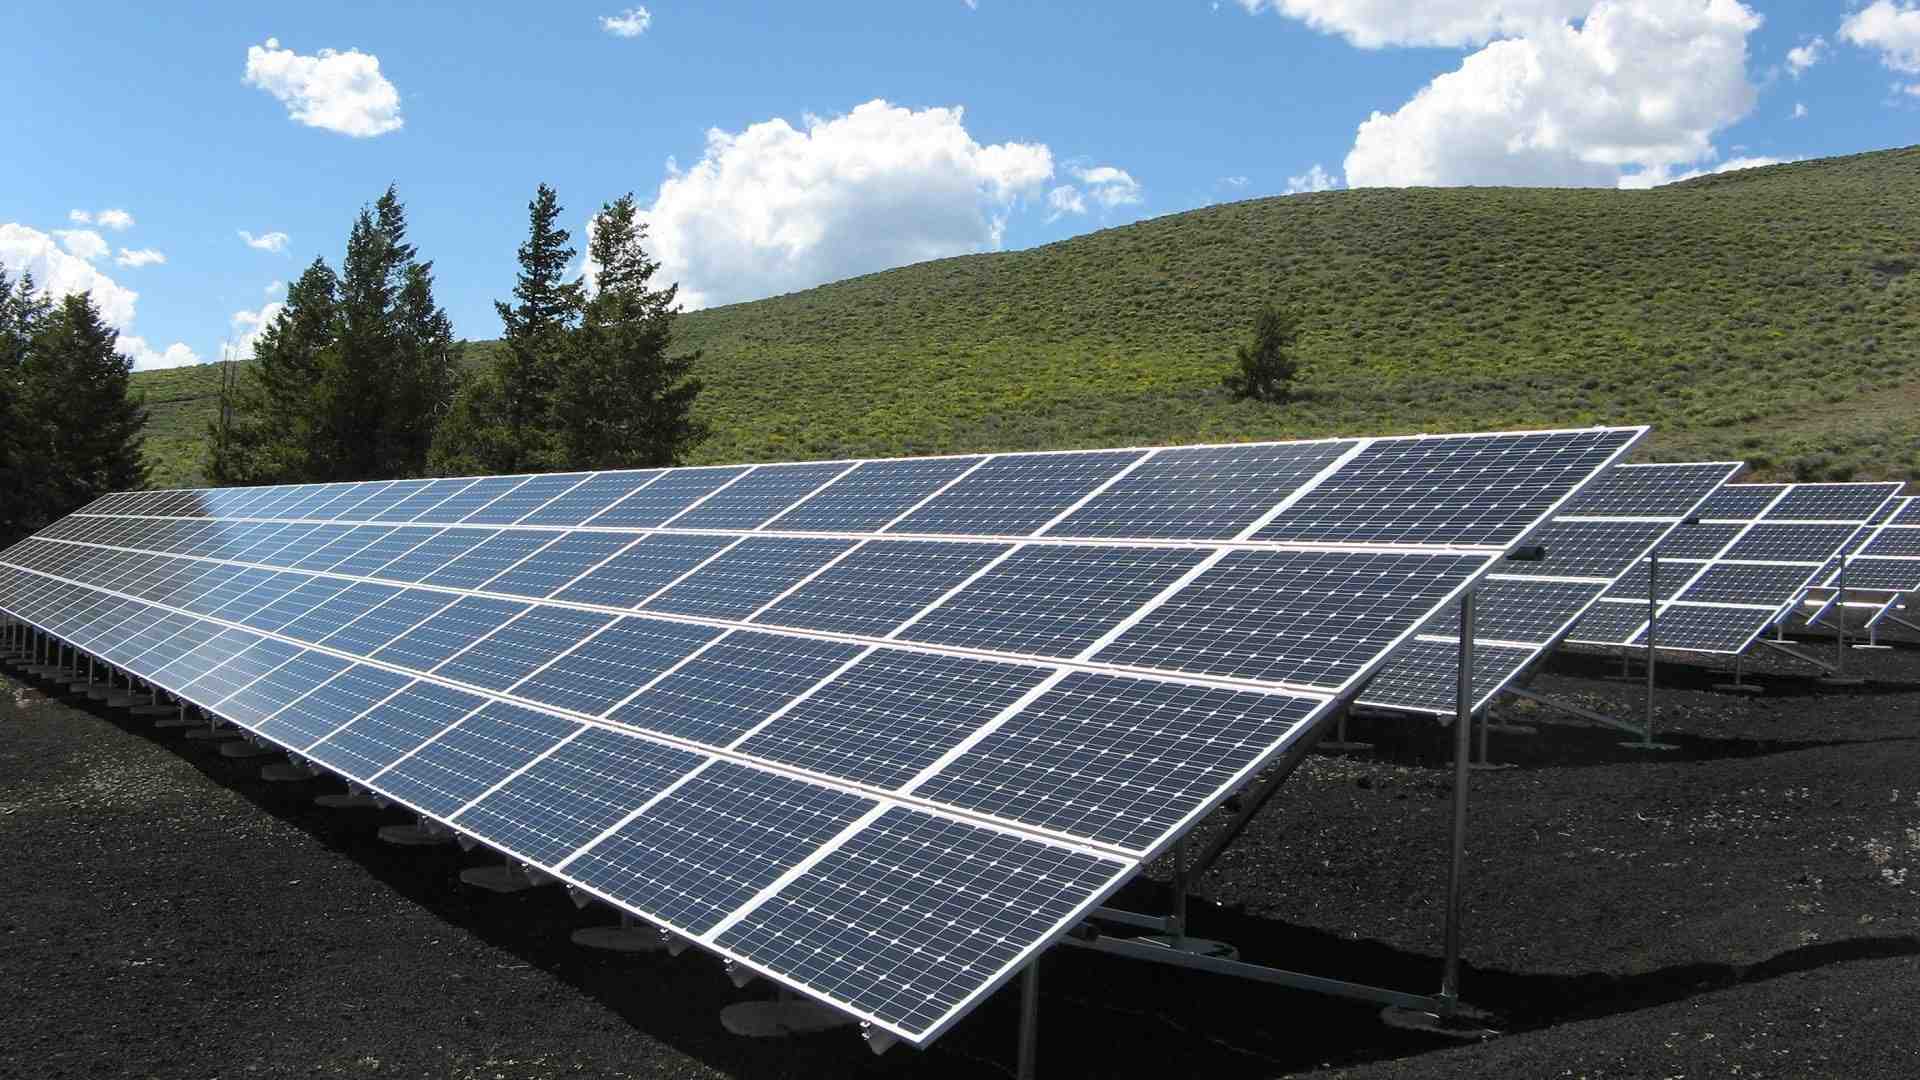 How much power a solar panel generate in a day?